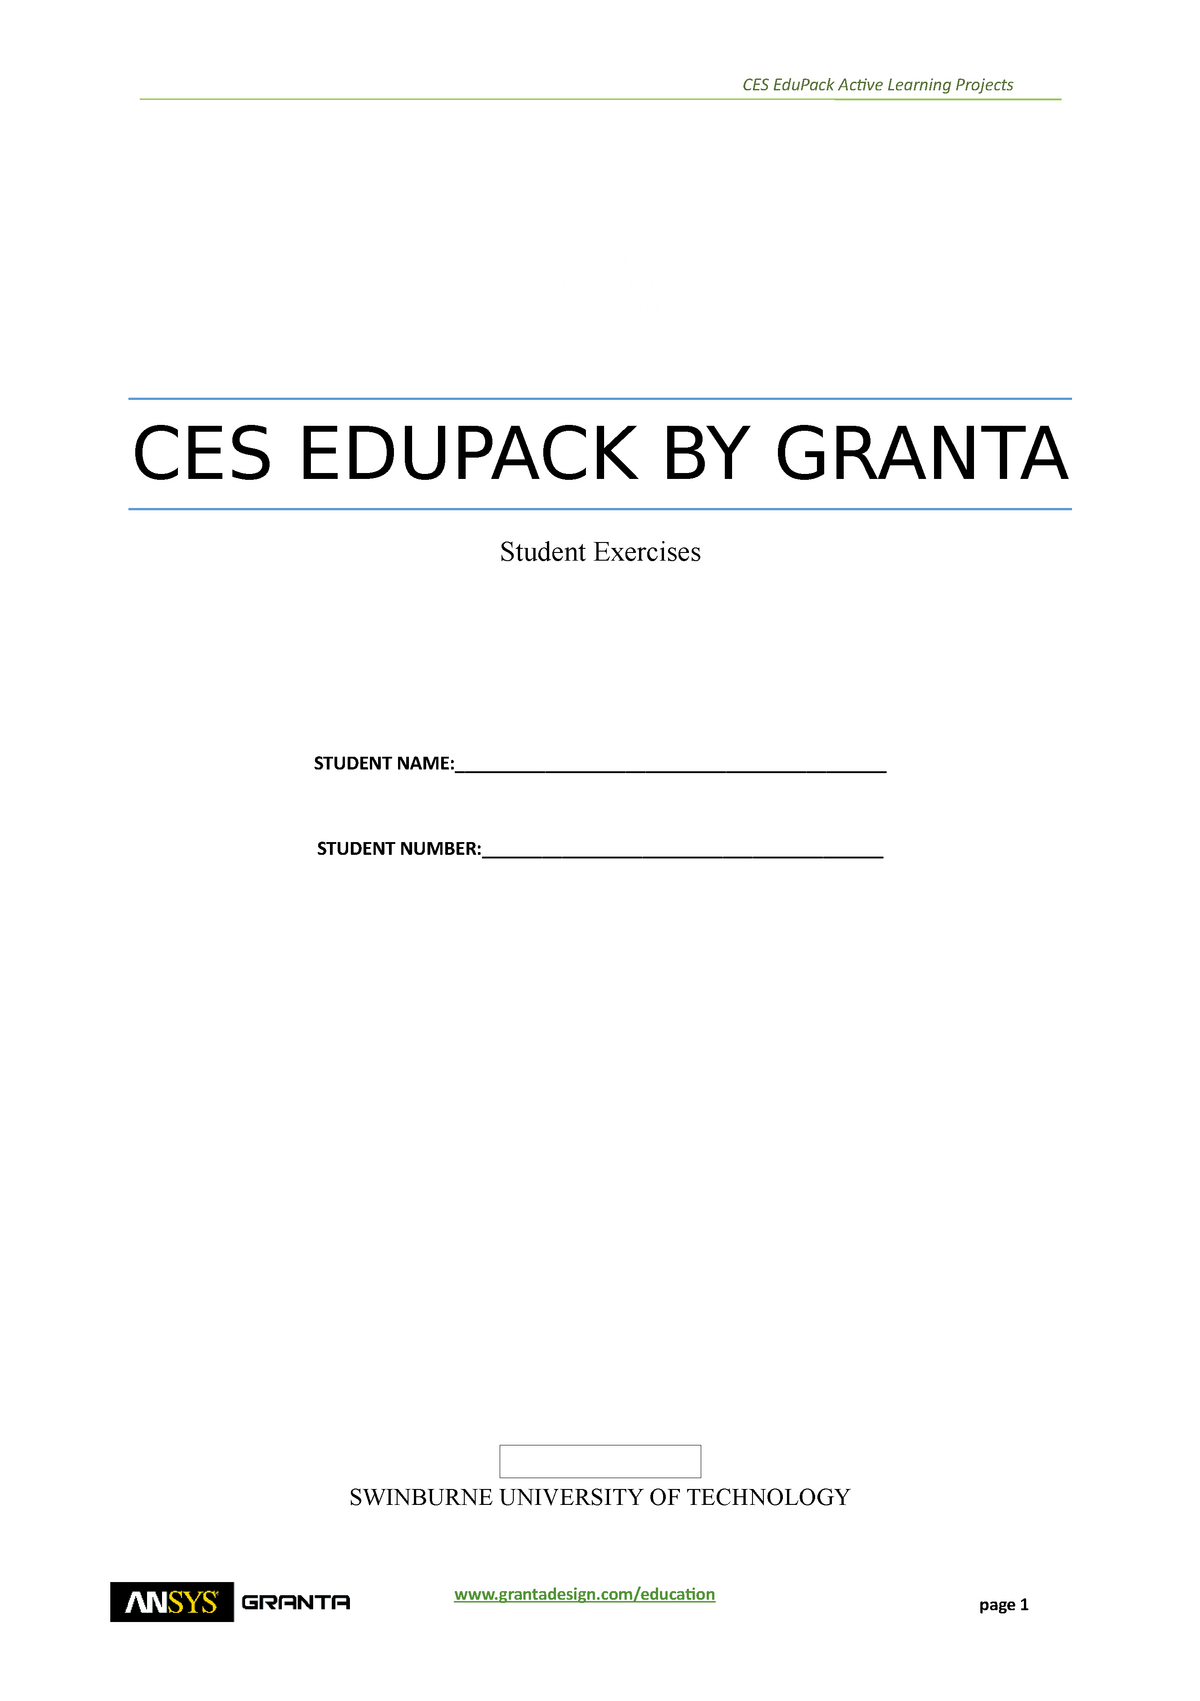 instructions for using ces edupack software